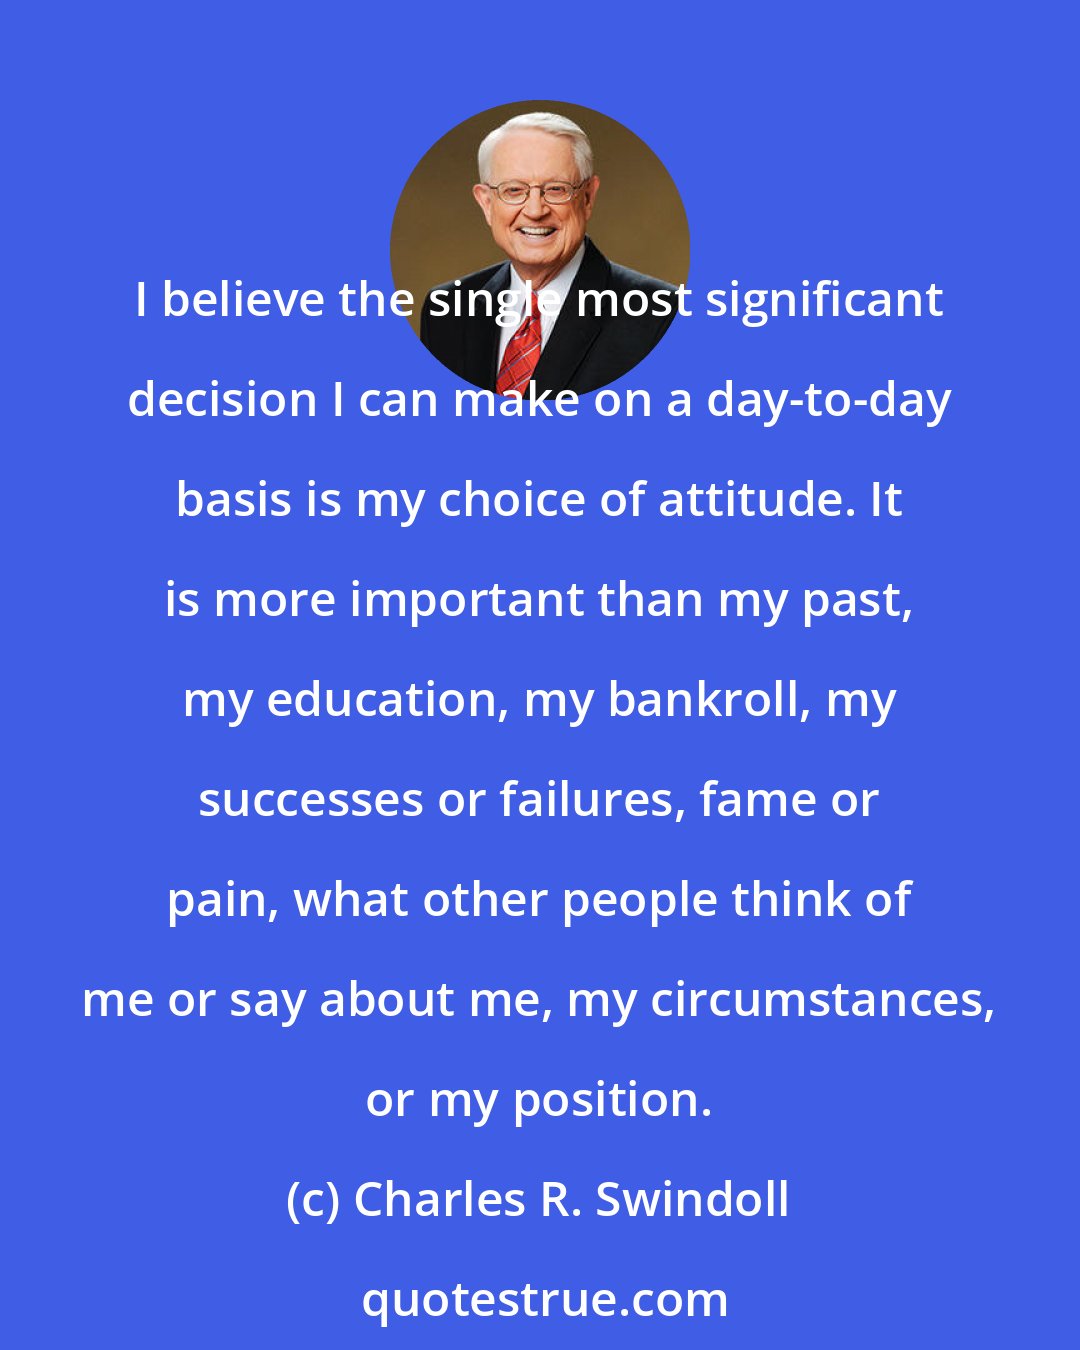 Charles R. Swindoll: I believe the single most significant decision I can make on a day-to-day basis is my choice of attitude. It is more important than my past, my education, my bankroll, my successes or failures, fame or pain, what other people think of me or say about me, my circumstances, or my position.